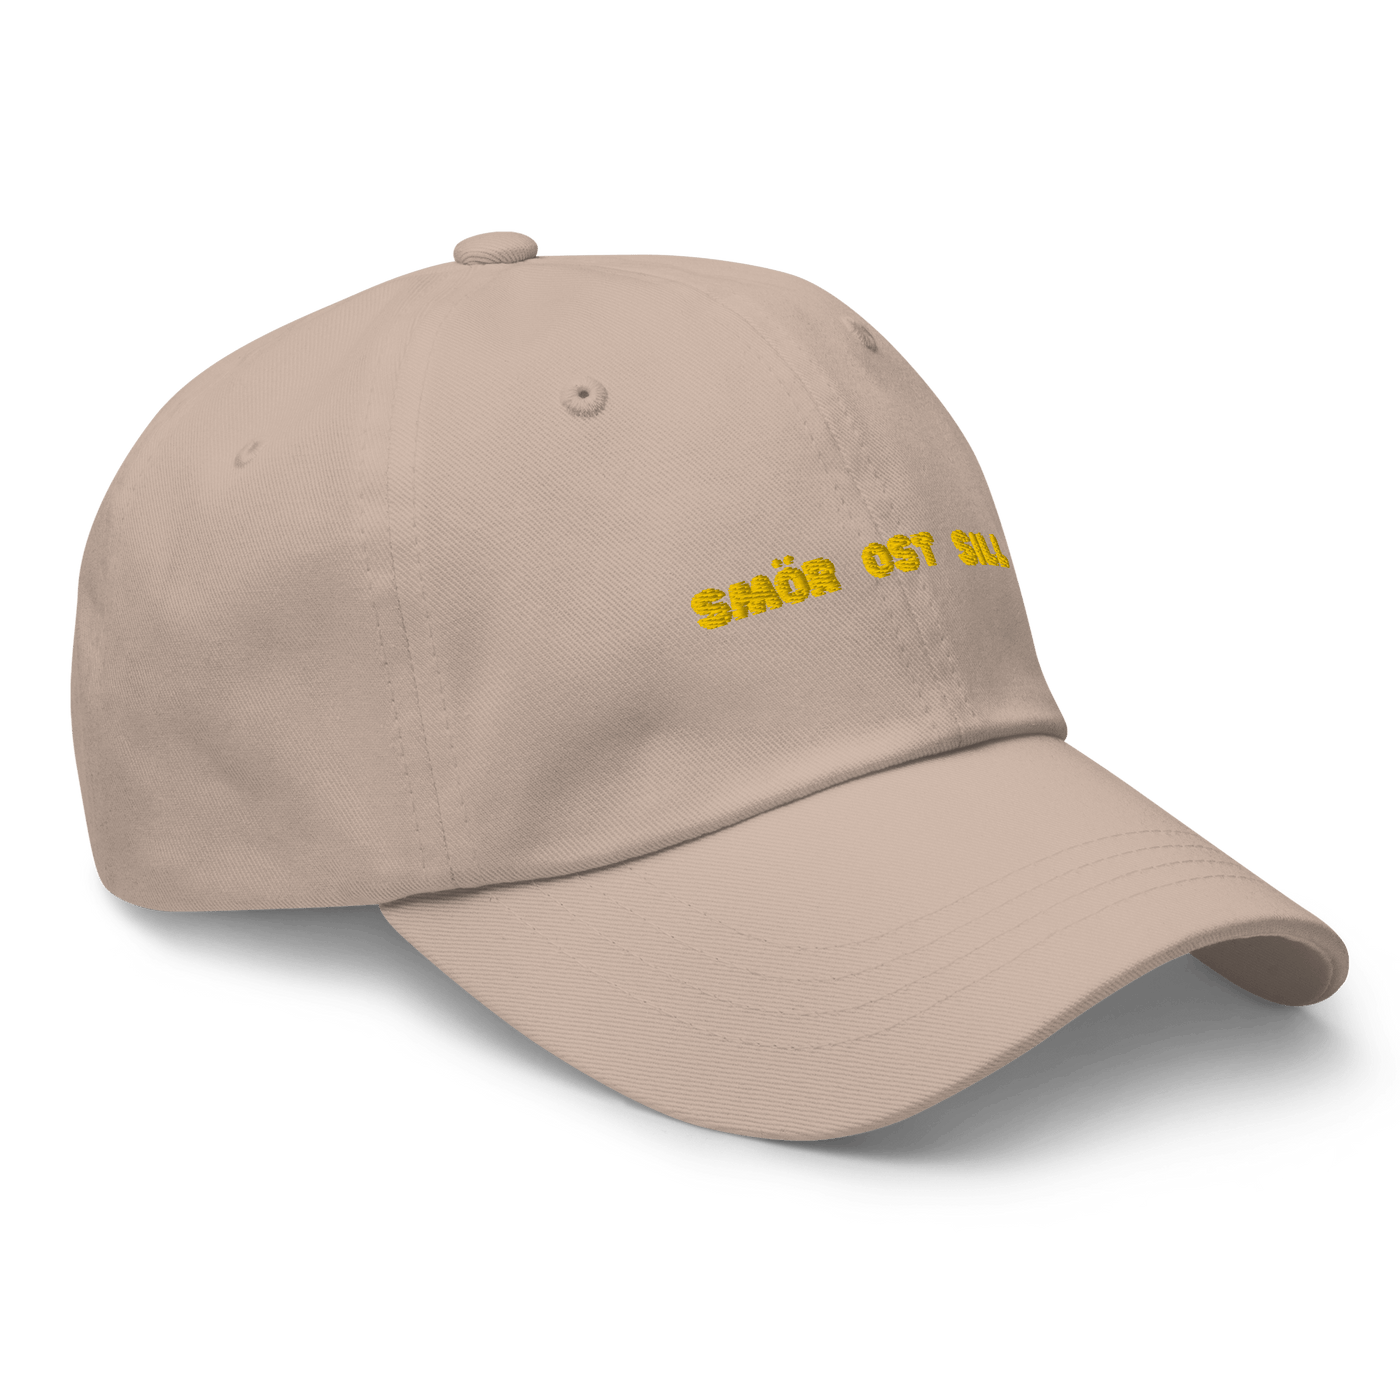 SOS Dad hat - Stone - Just Another Cap Store